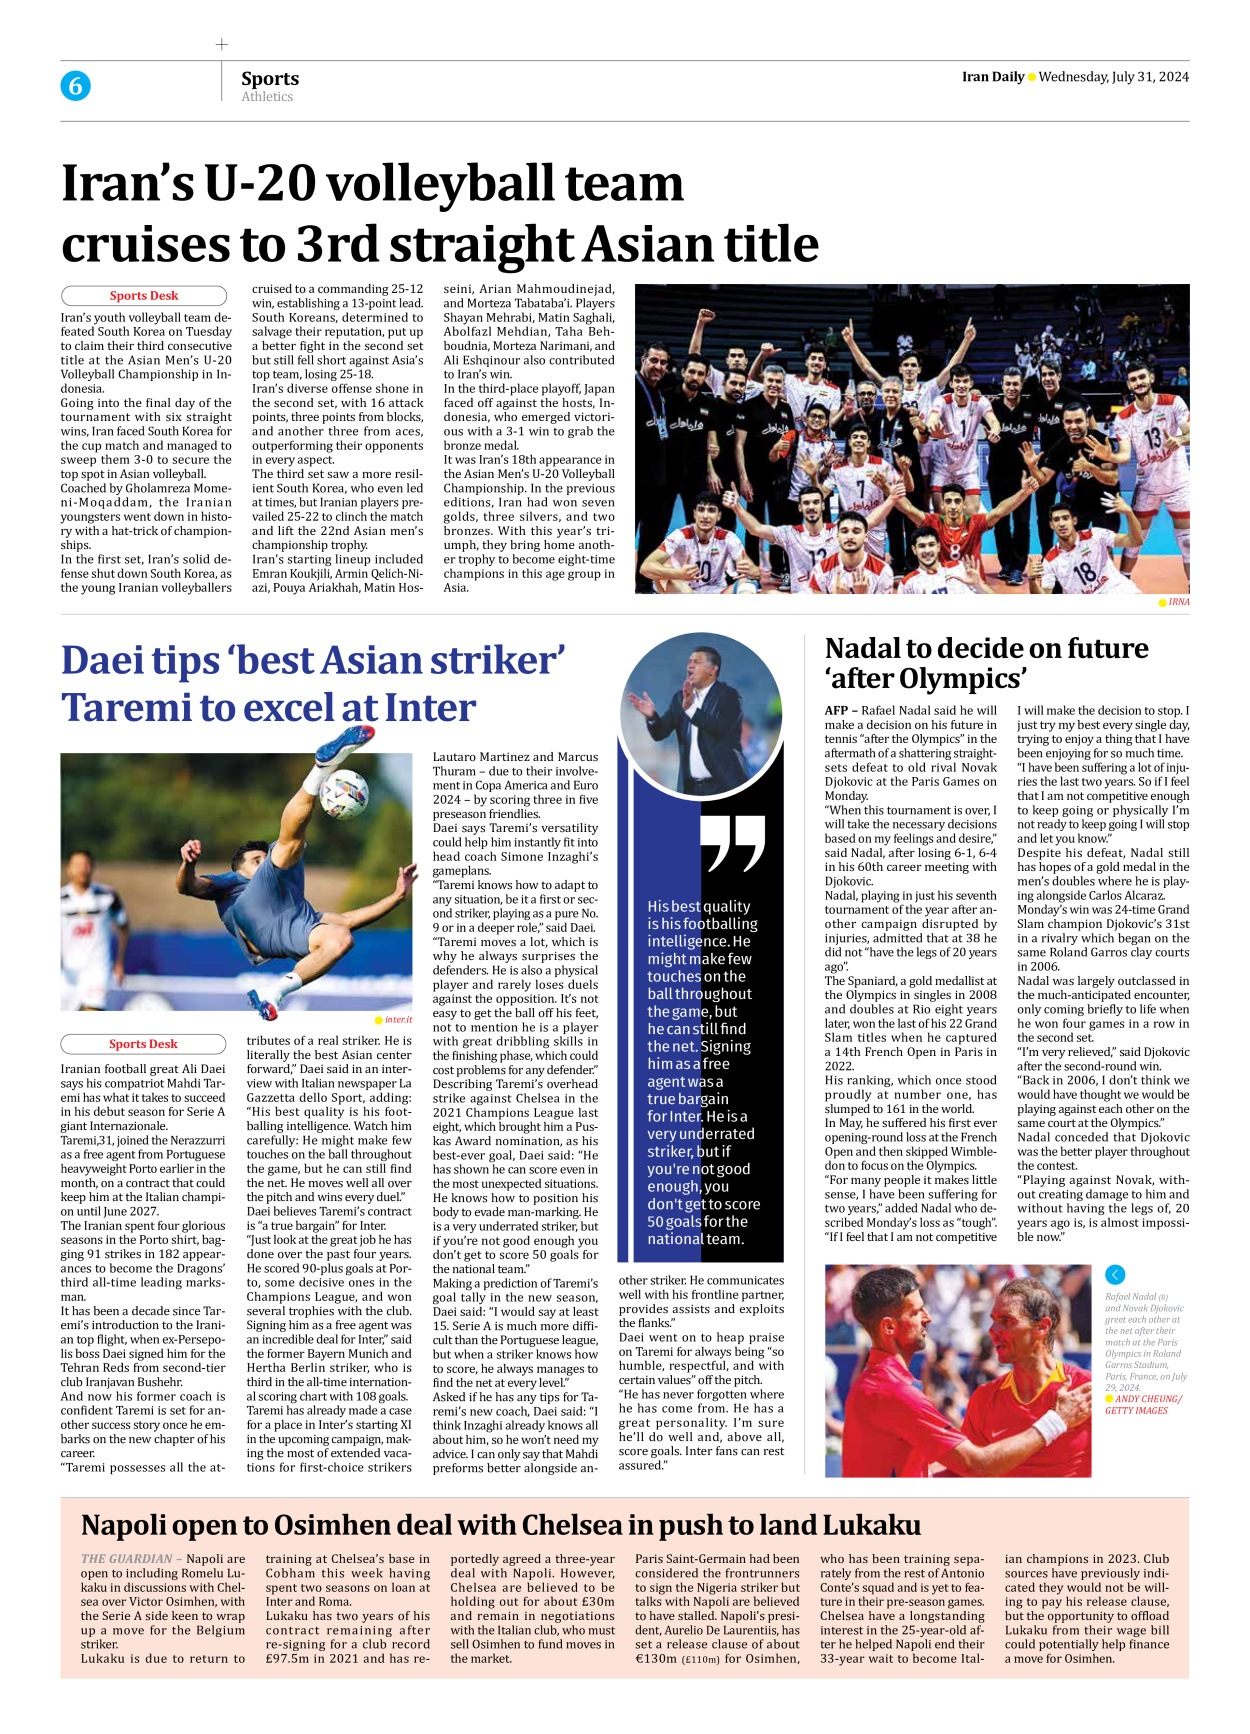 Iran Daily - Number Seven Thousand Six Hundred and Sixteen - 31 July 2024 - Page 6